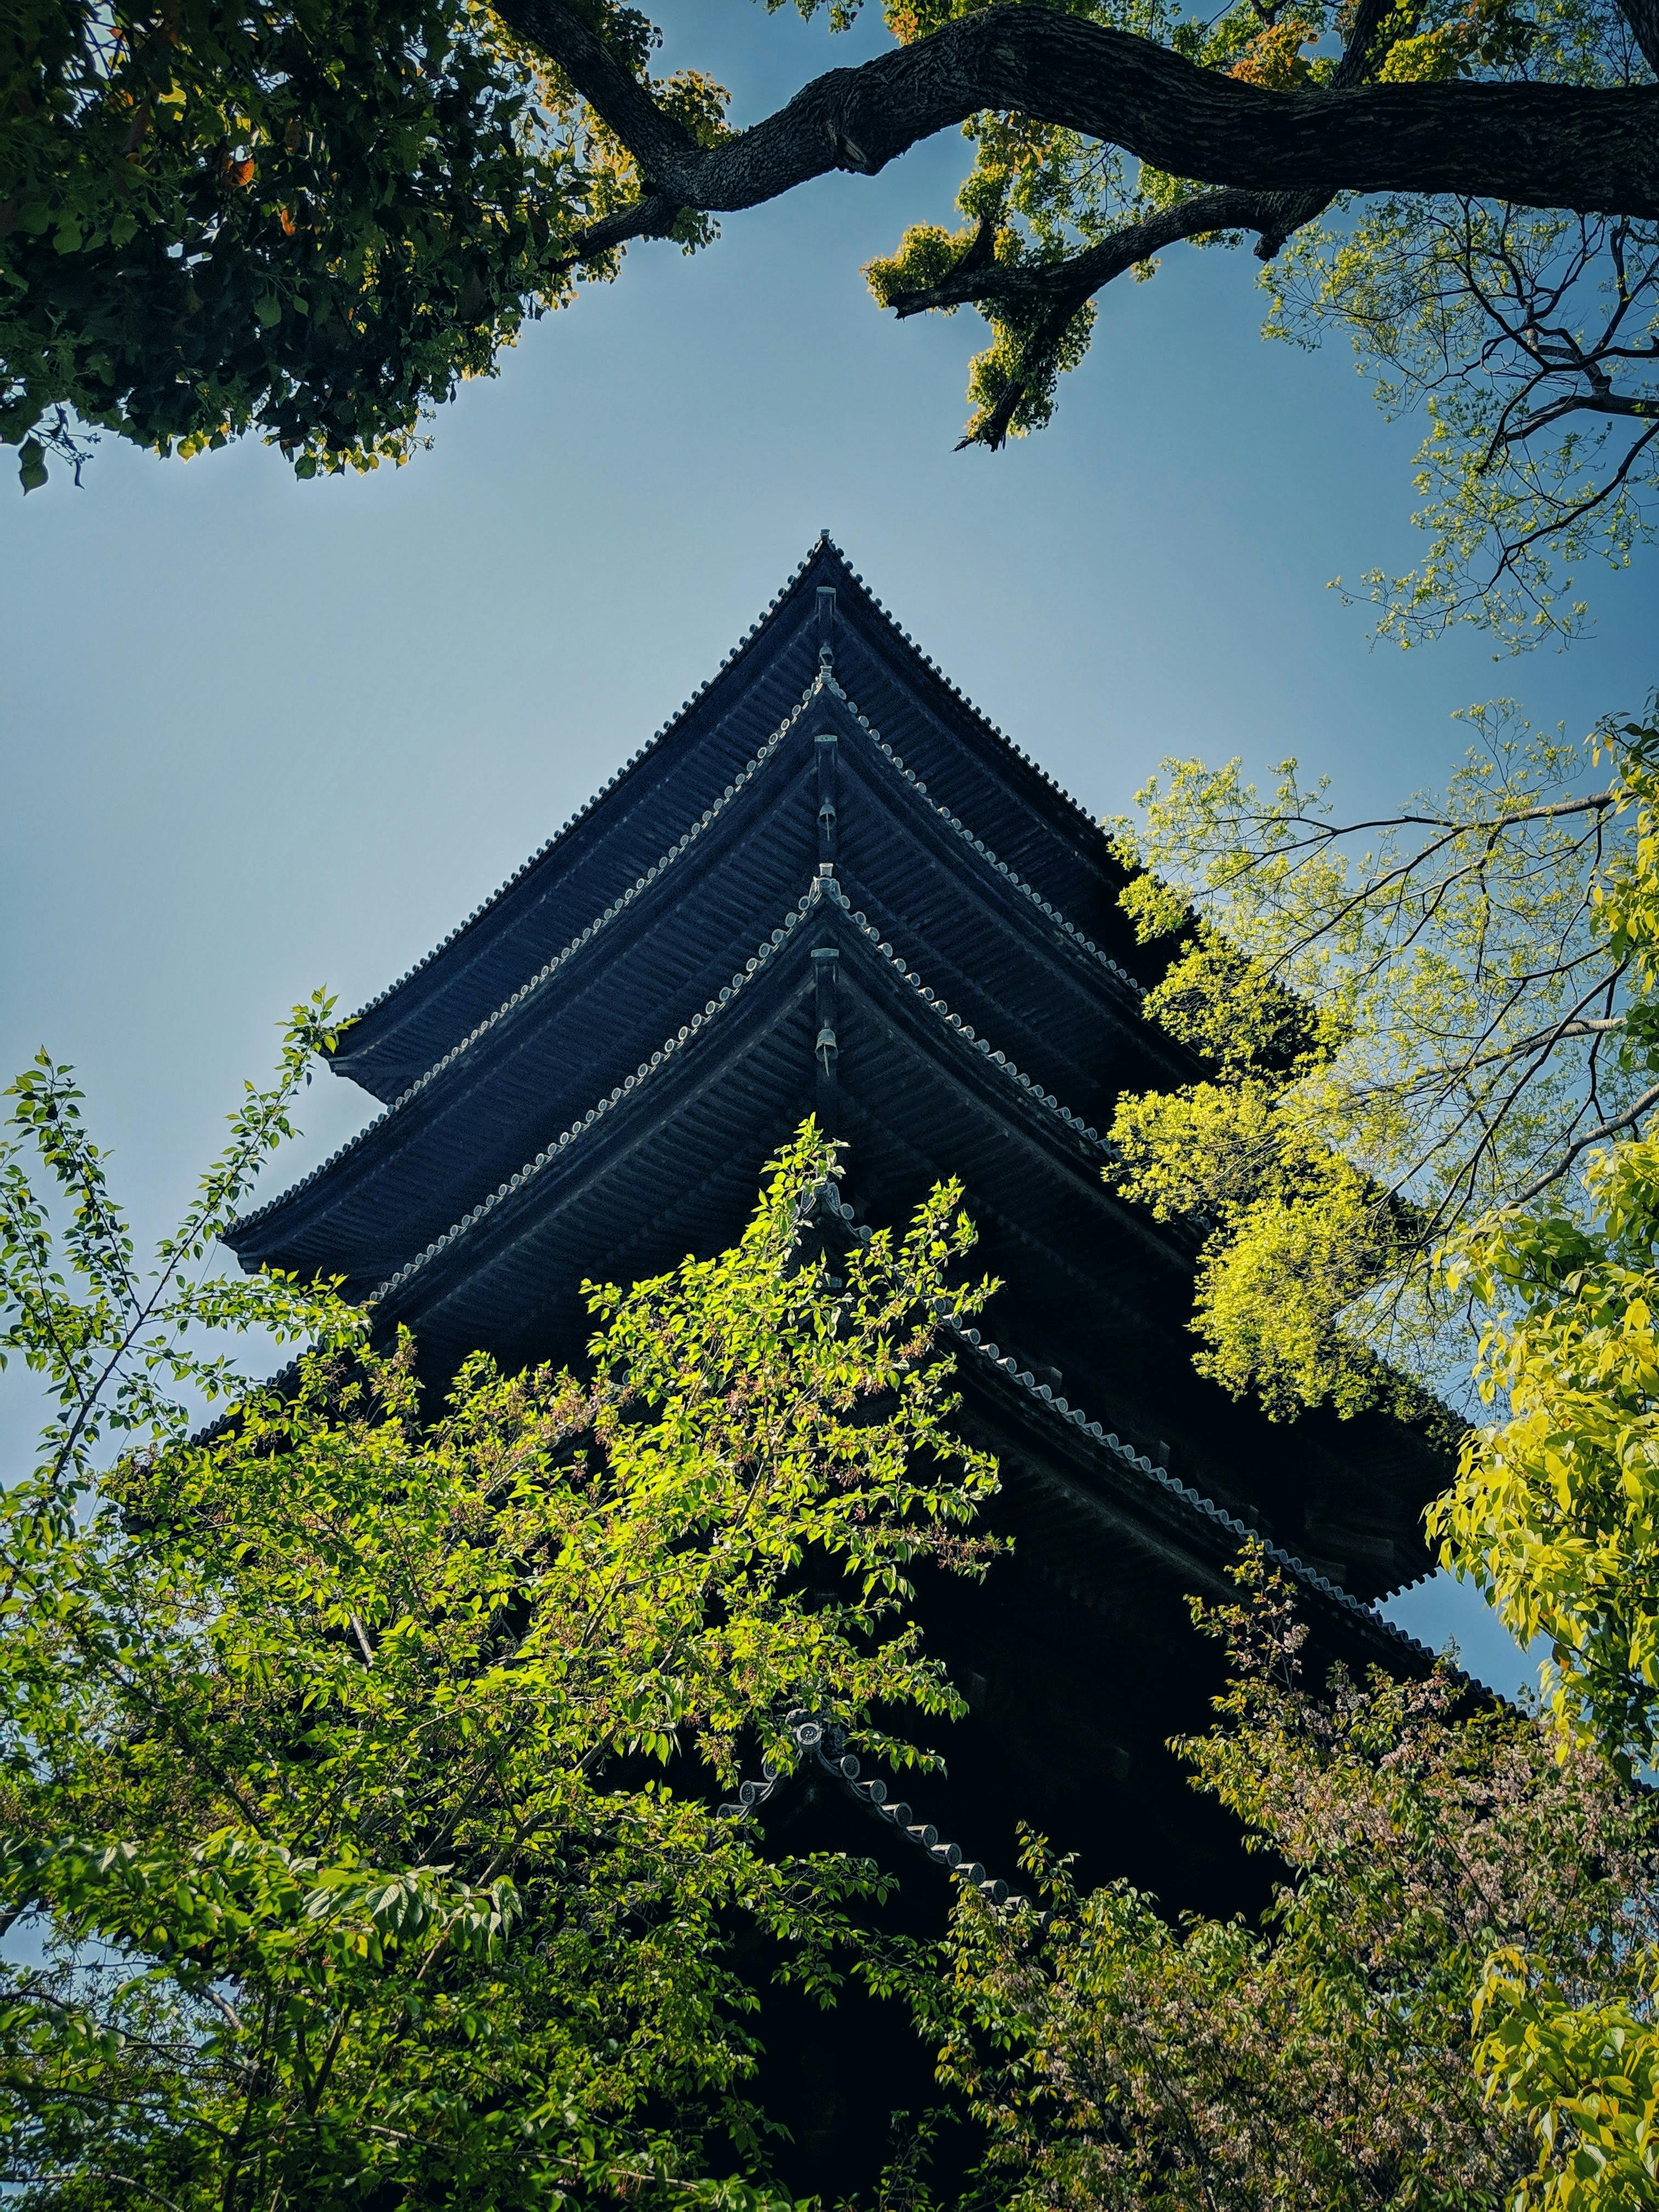 A view of a pagoda through green tree branches in Kyoto, Japan